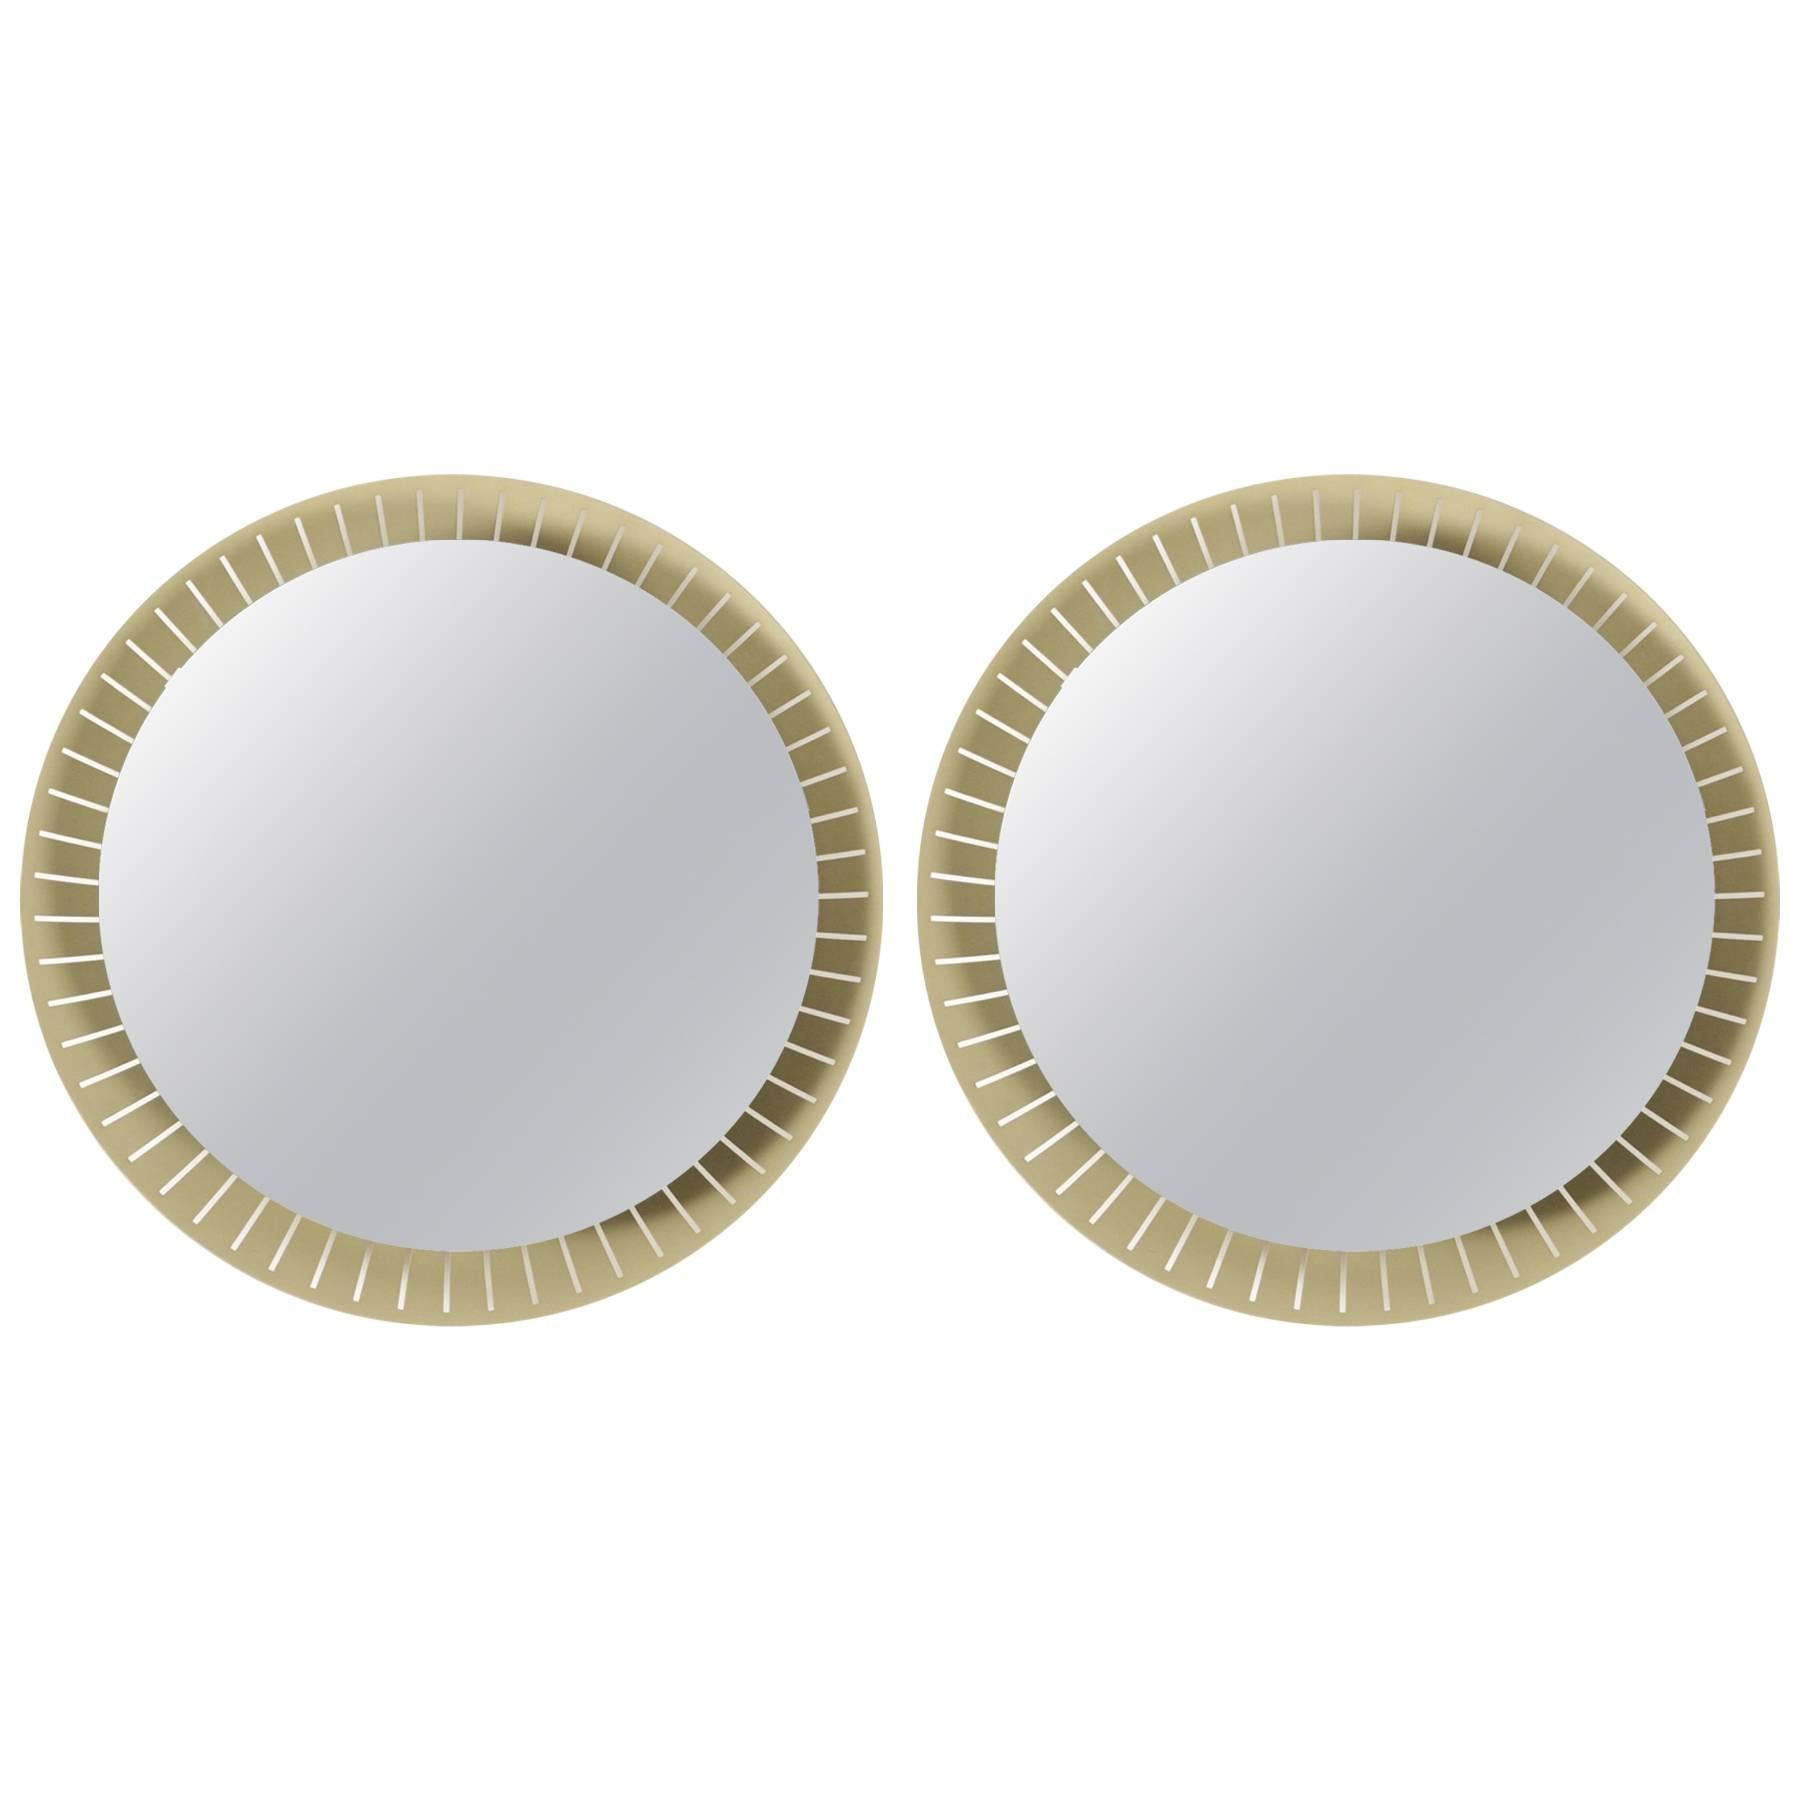 1960s Pair of Large Round Back-Lit Mirror, Gilded Metal Frame